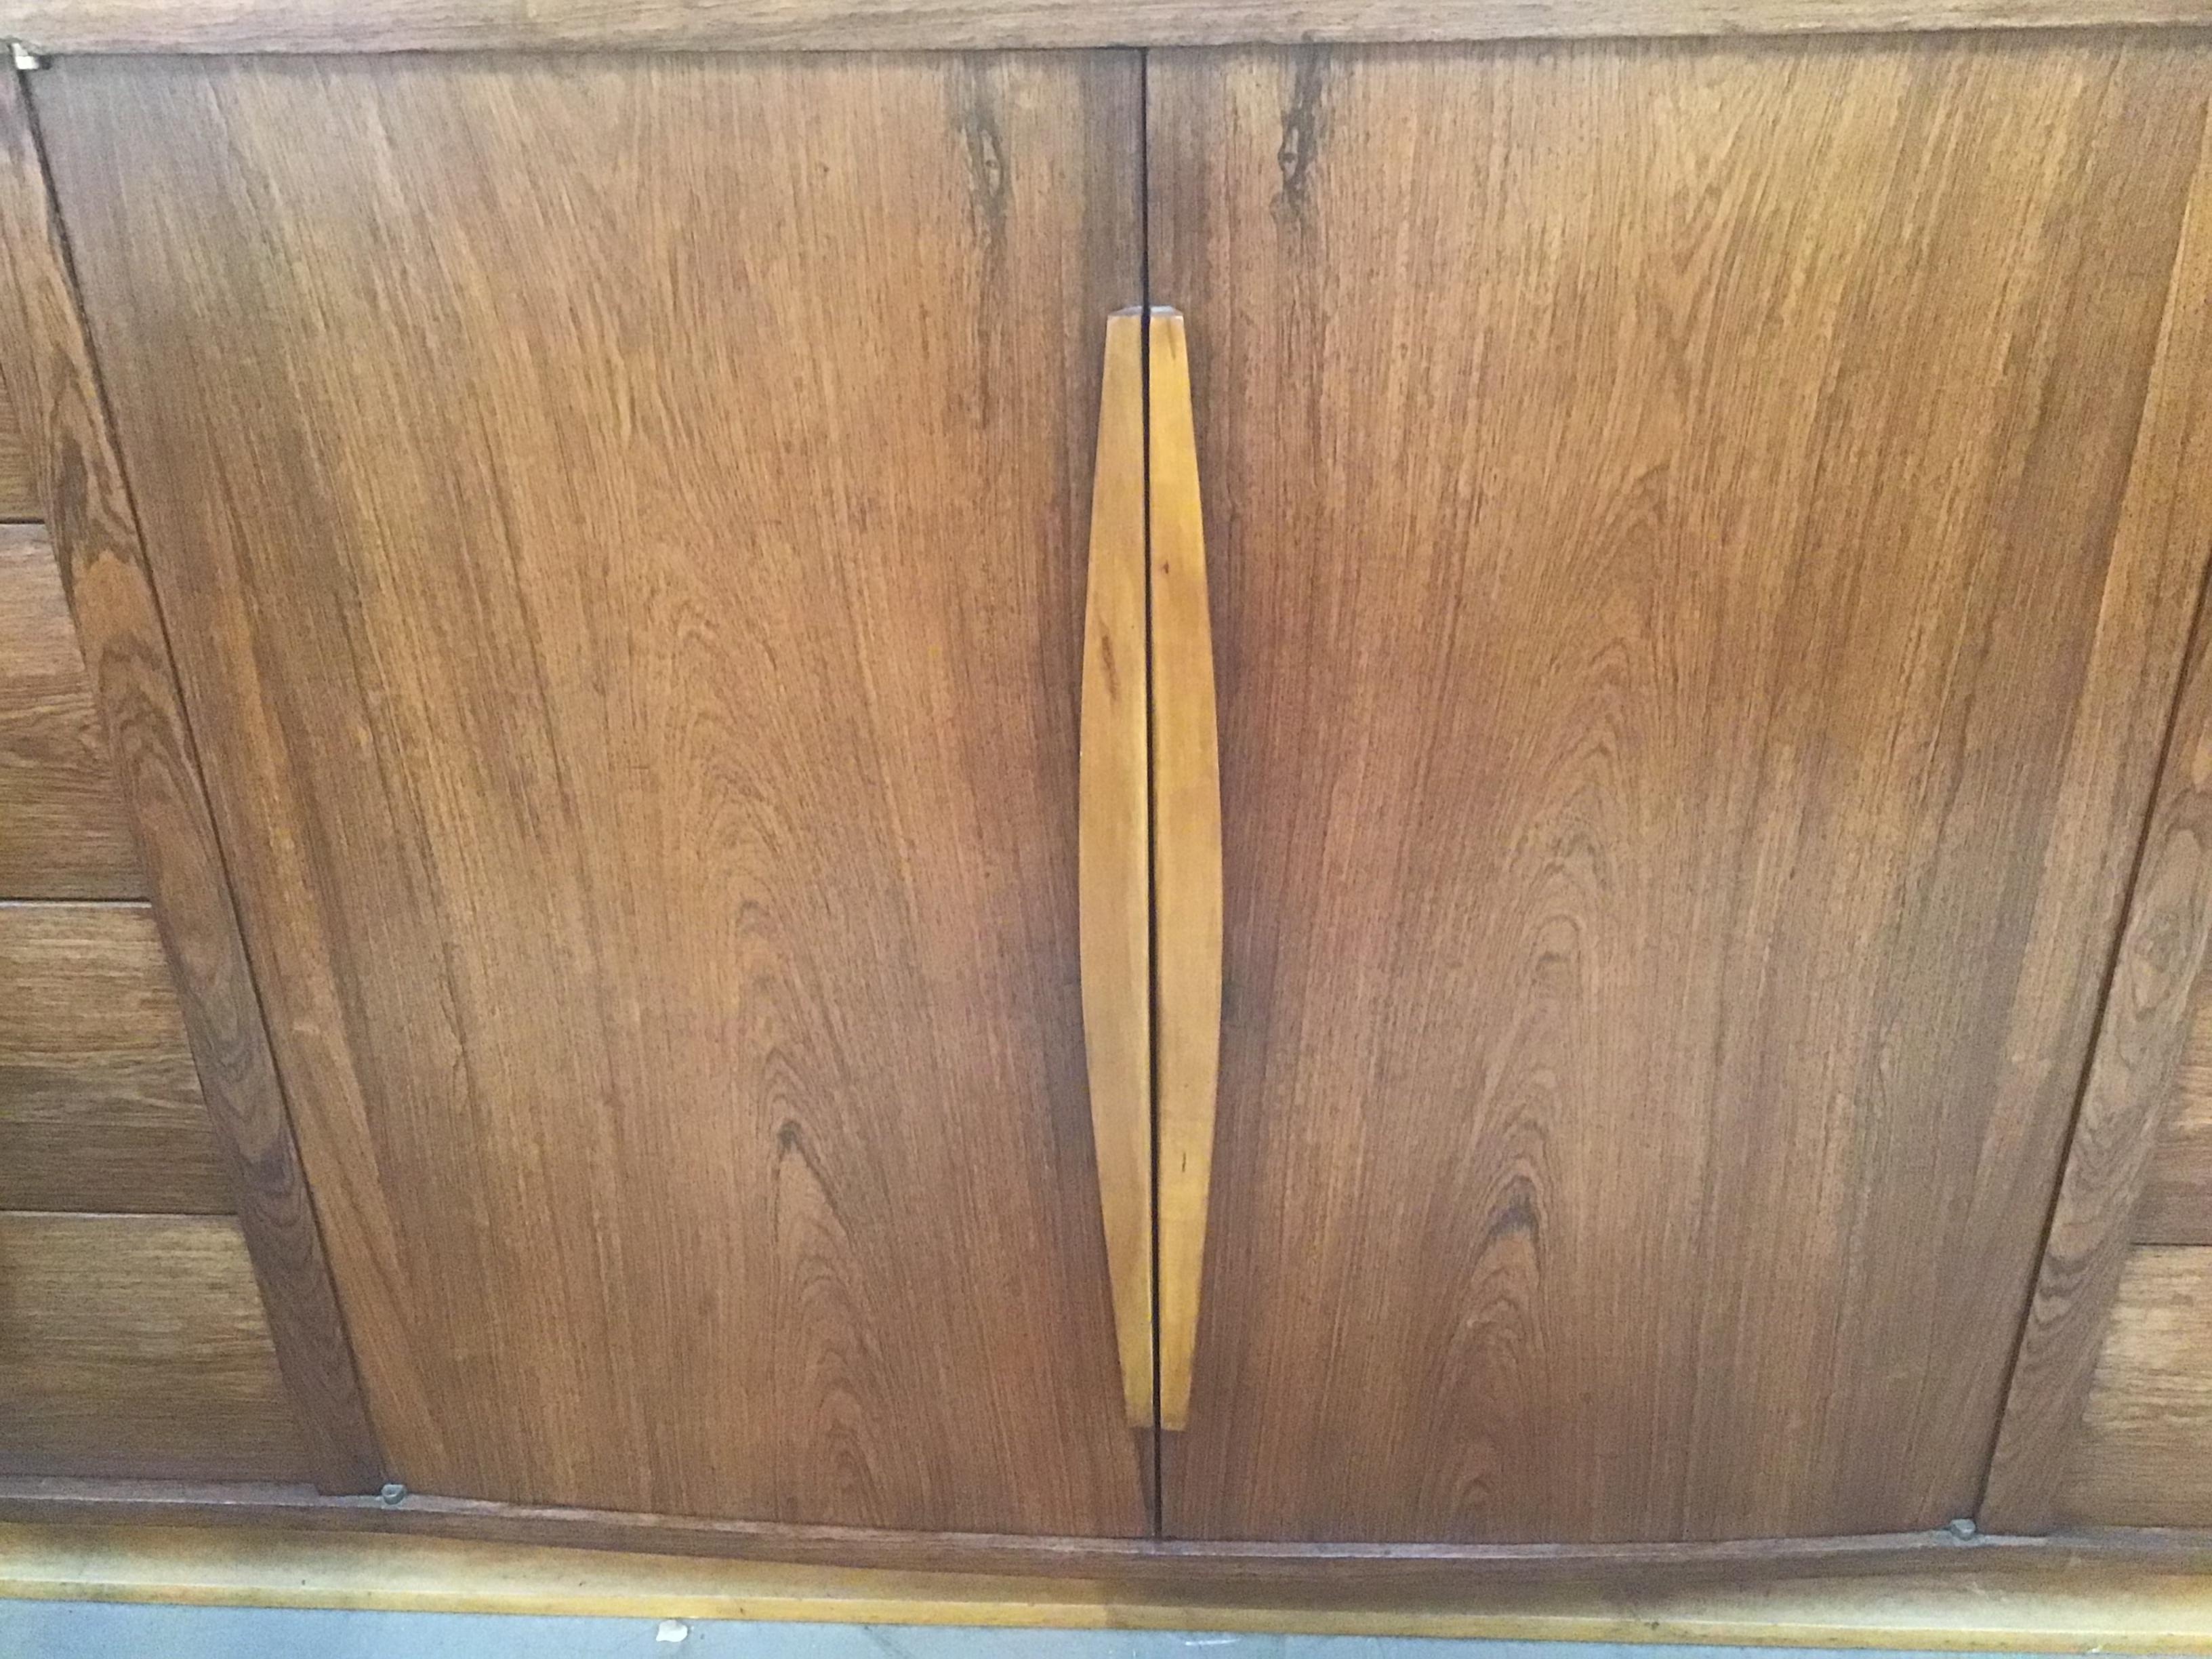 20th Century Italian Art Deco Teak Wood Cupboard with Drawers and Shutters (Teakholz) im Angebot